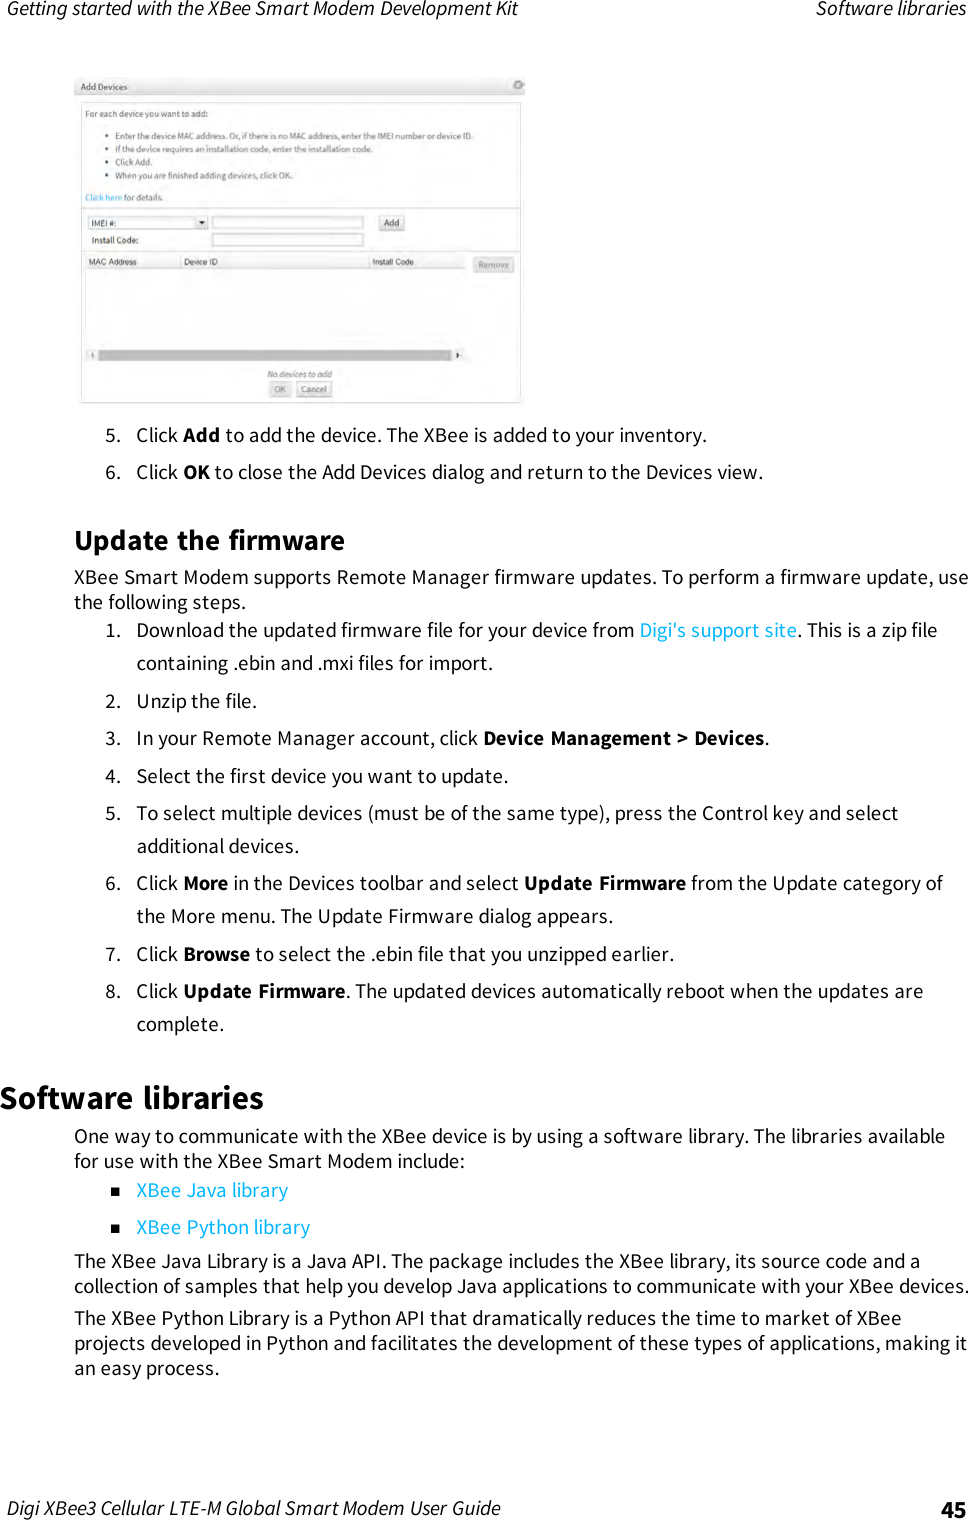 Page 45 of Digi XB3M1 XBee3 Cellular LTE-M User Manual 